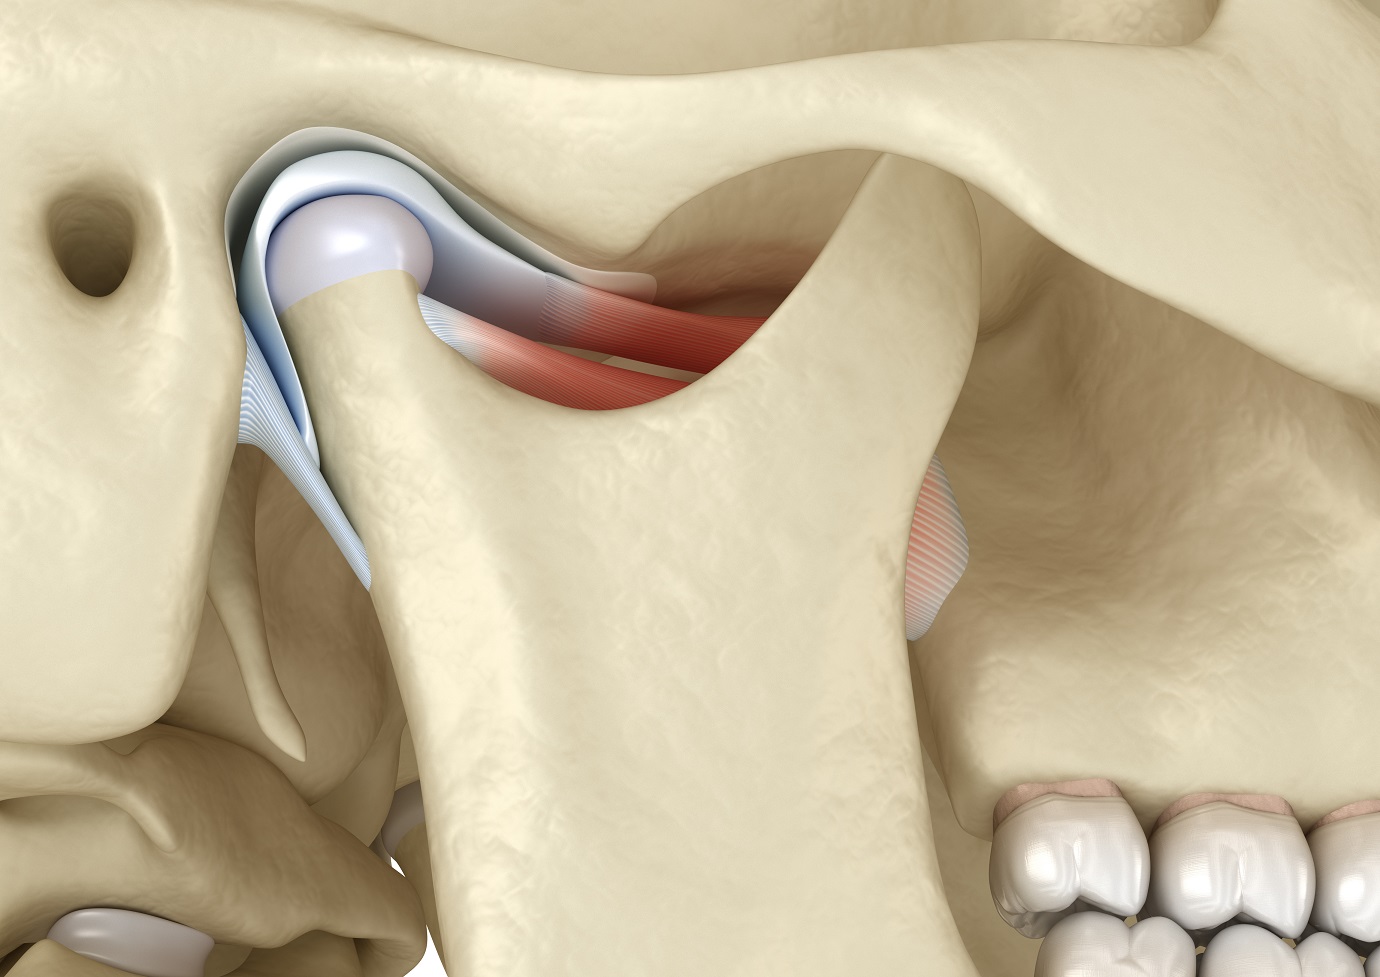 Find Relief with TMJ Treatment